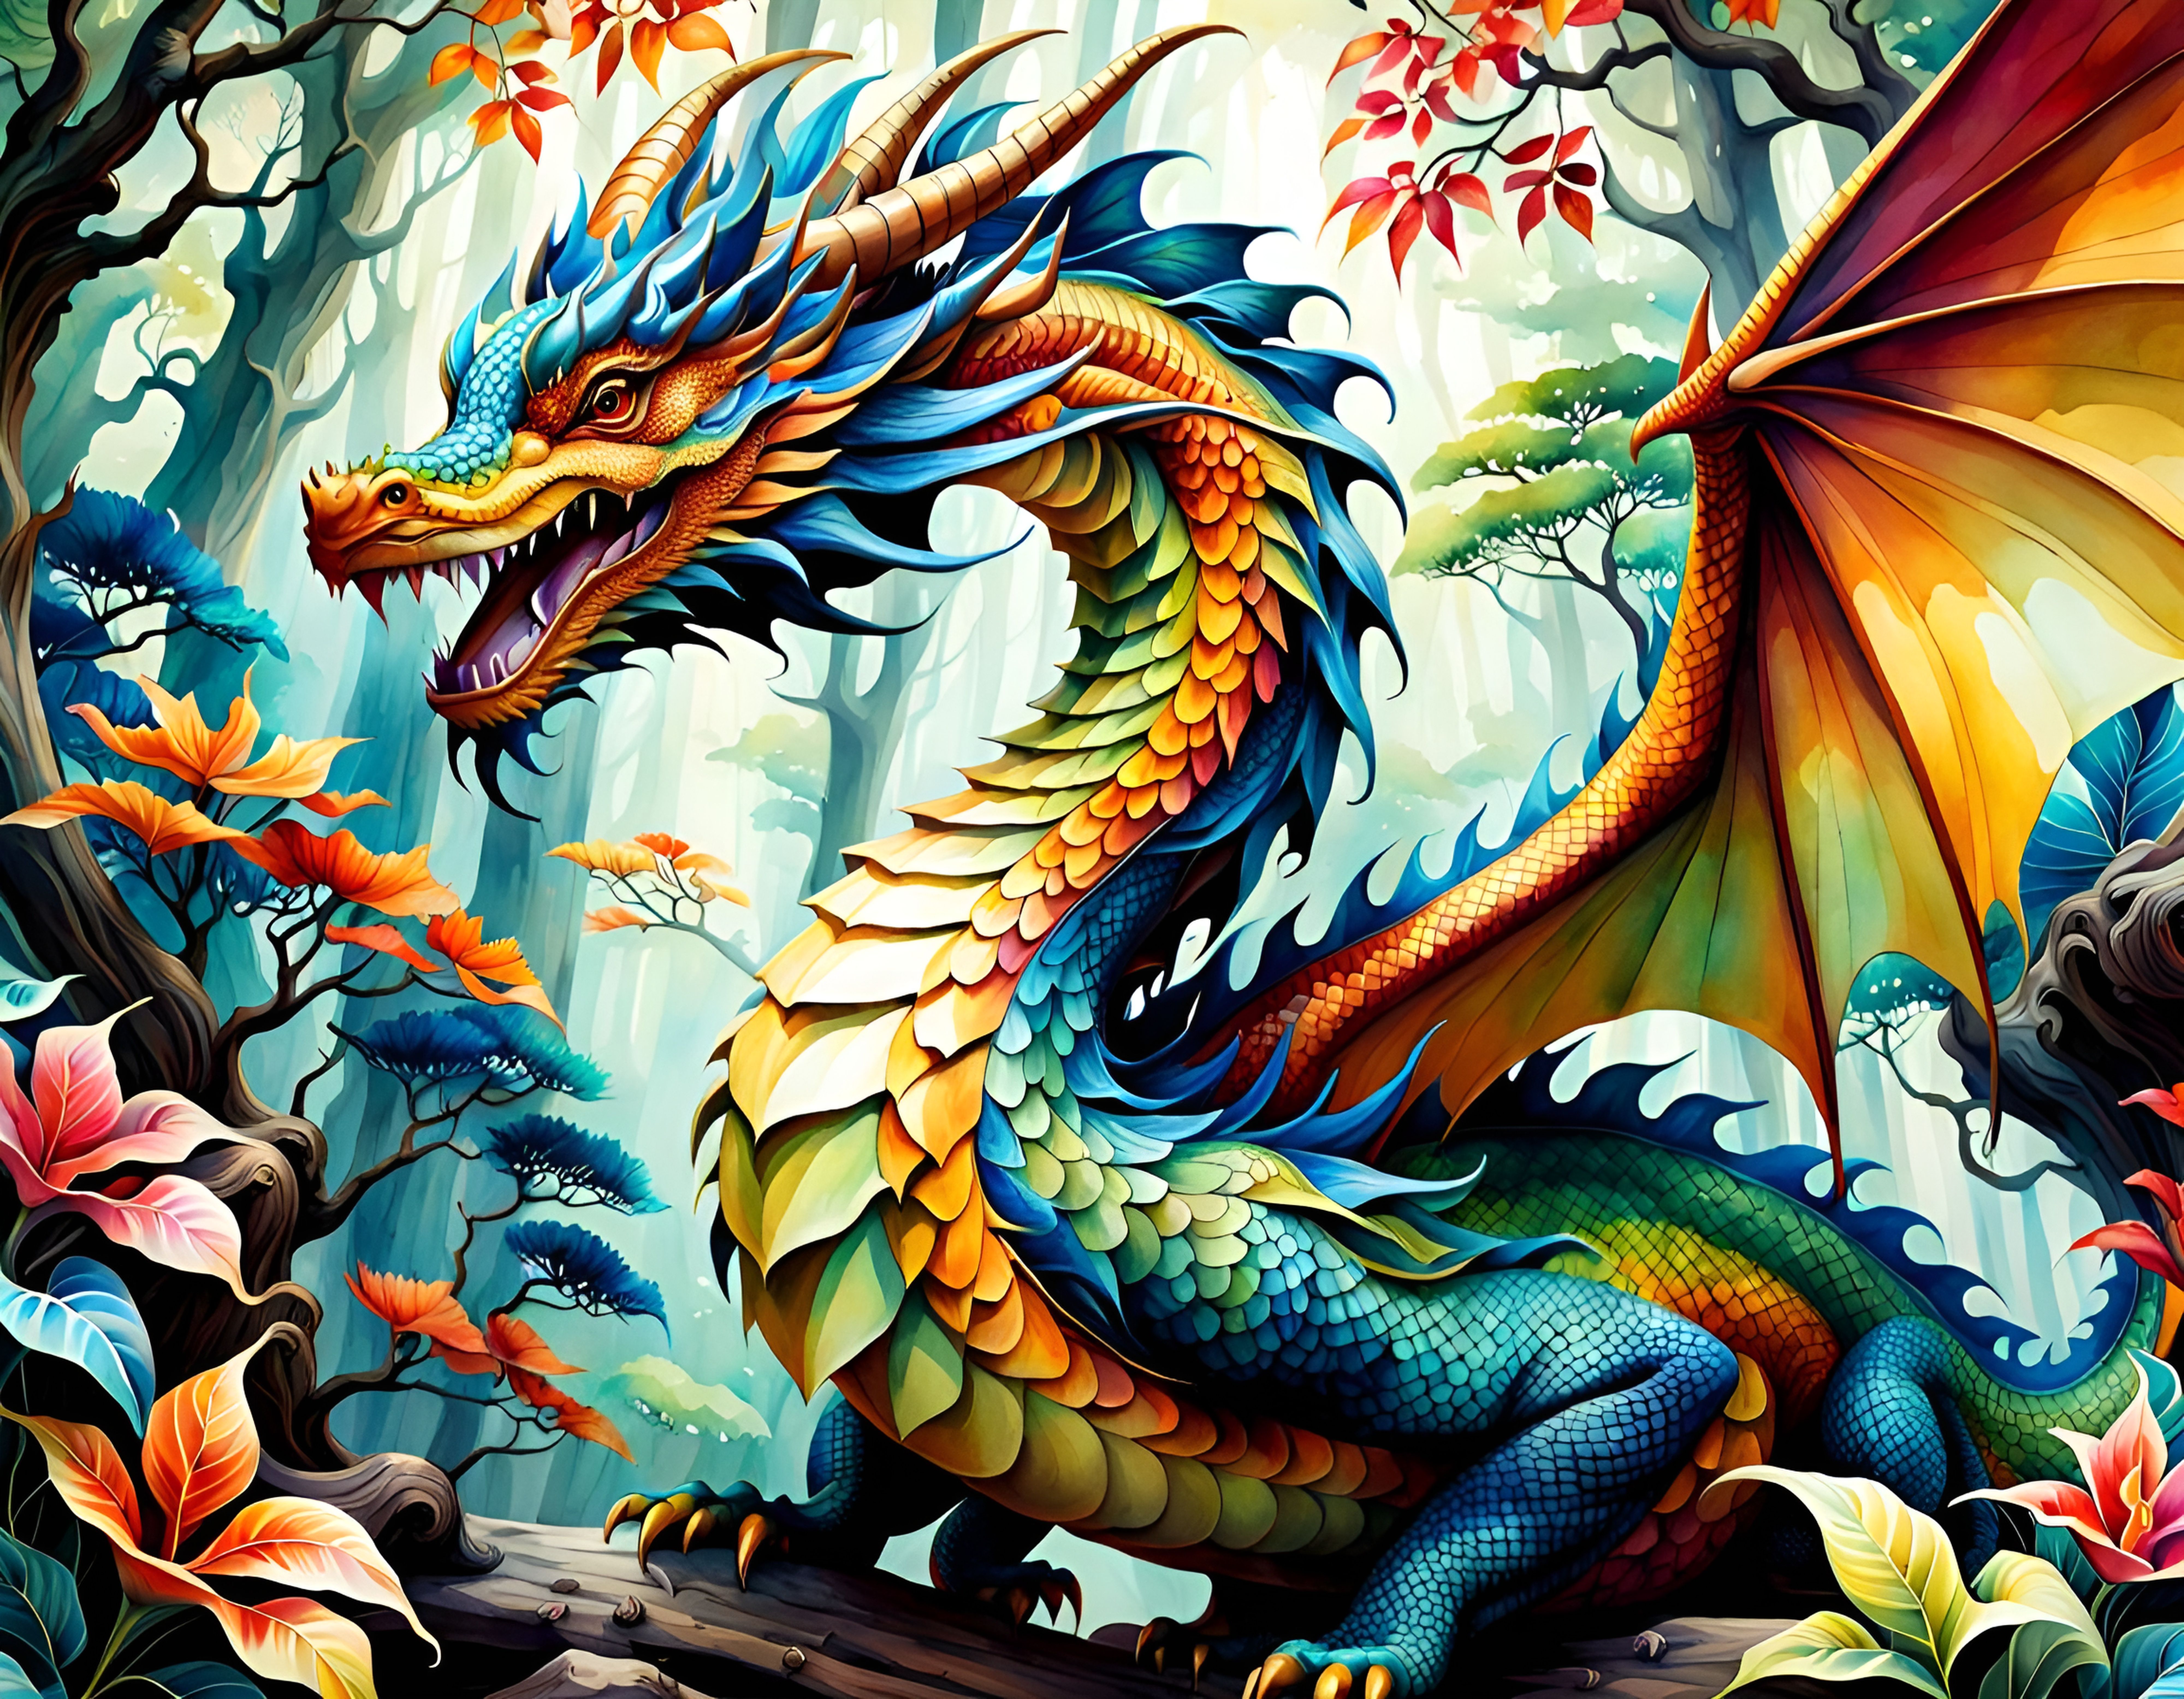 Legendary Mythical Magical Beast the Wood Dragon - AI Generated